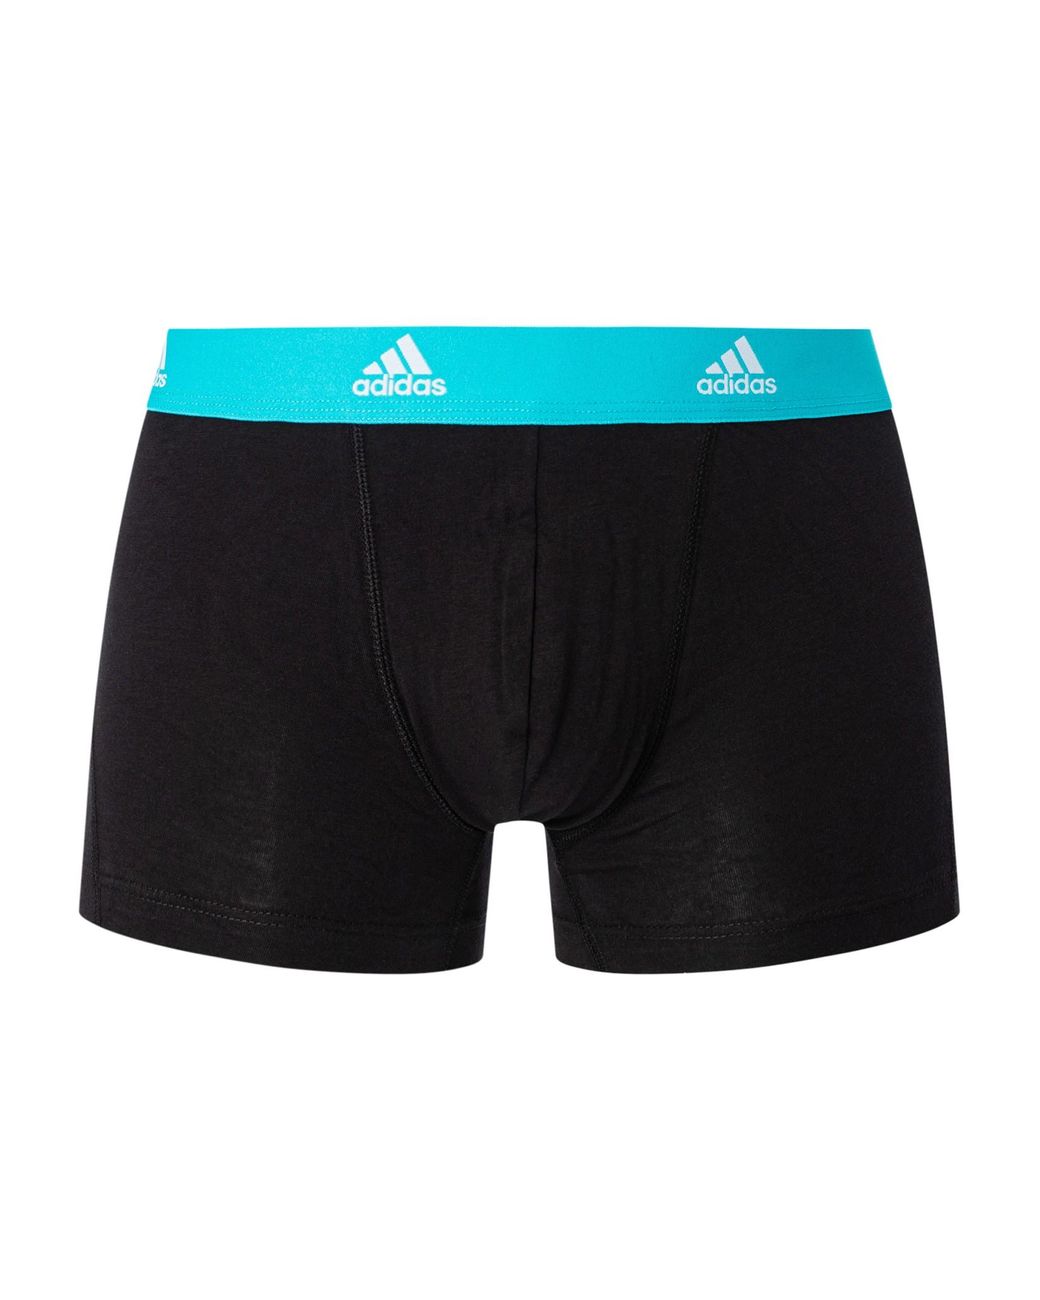 adidas 3 Pack Active Flex Cotton Trunks in Blue for Men